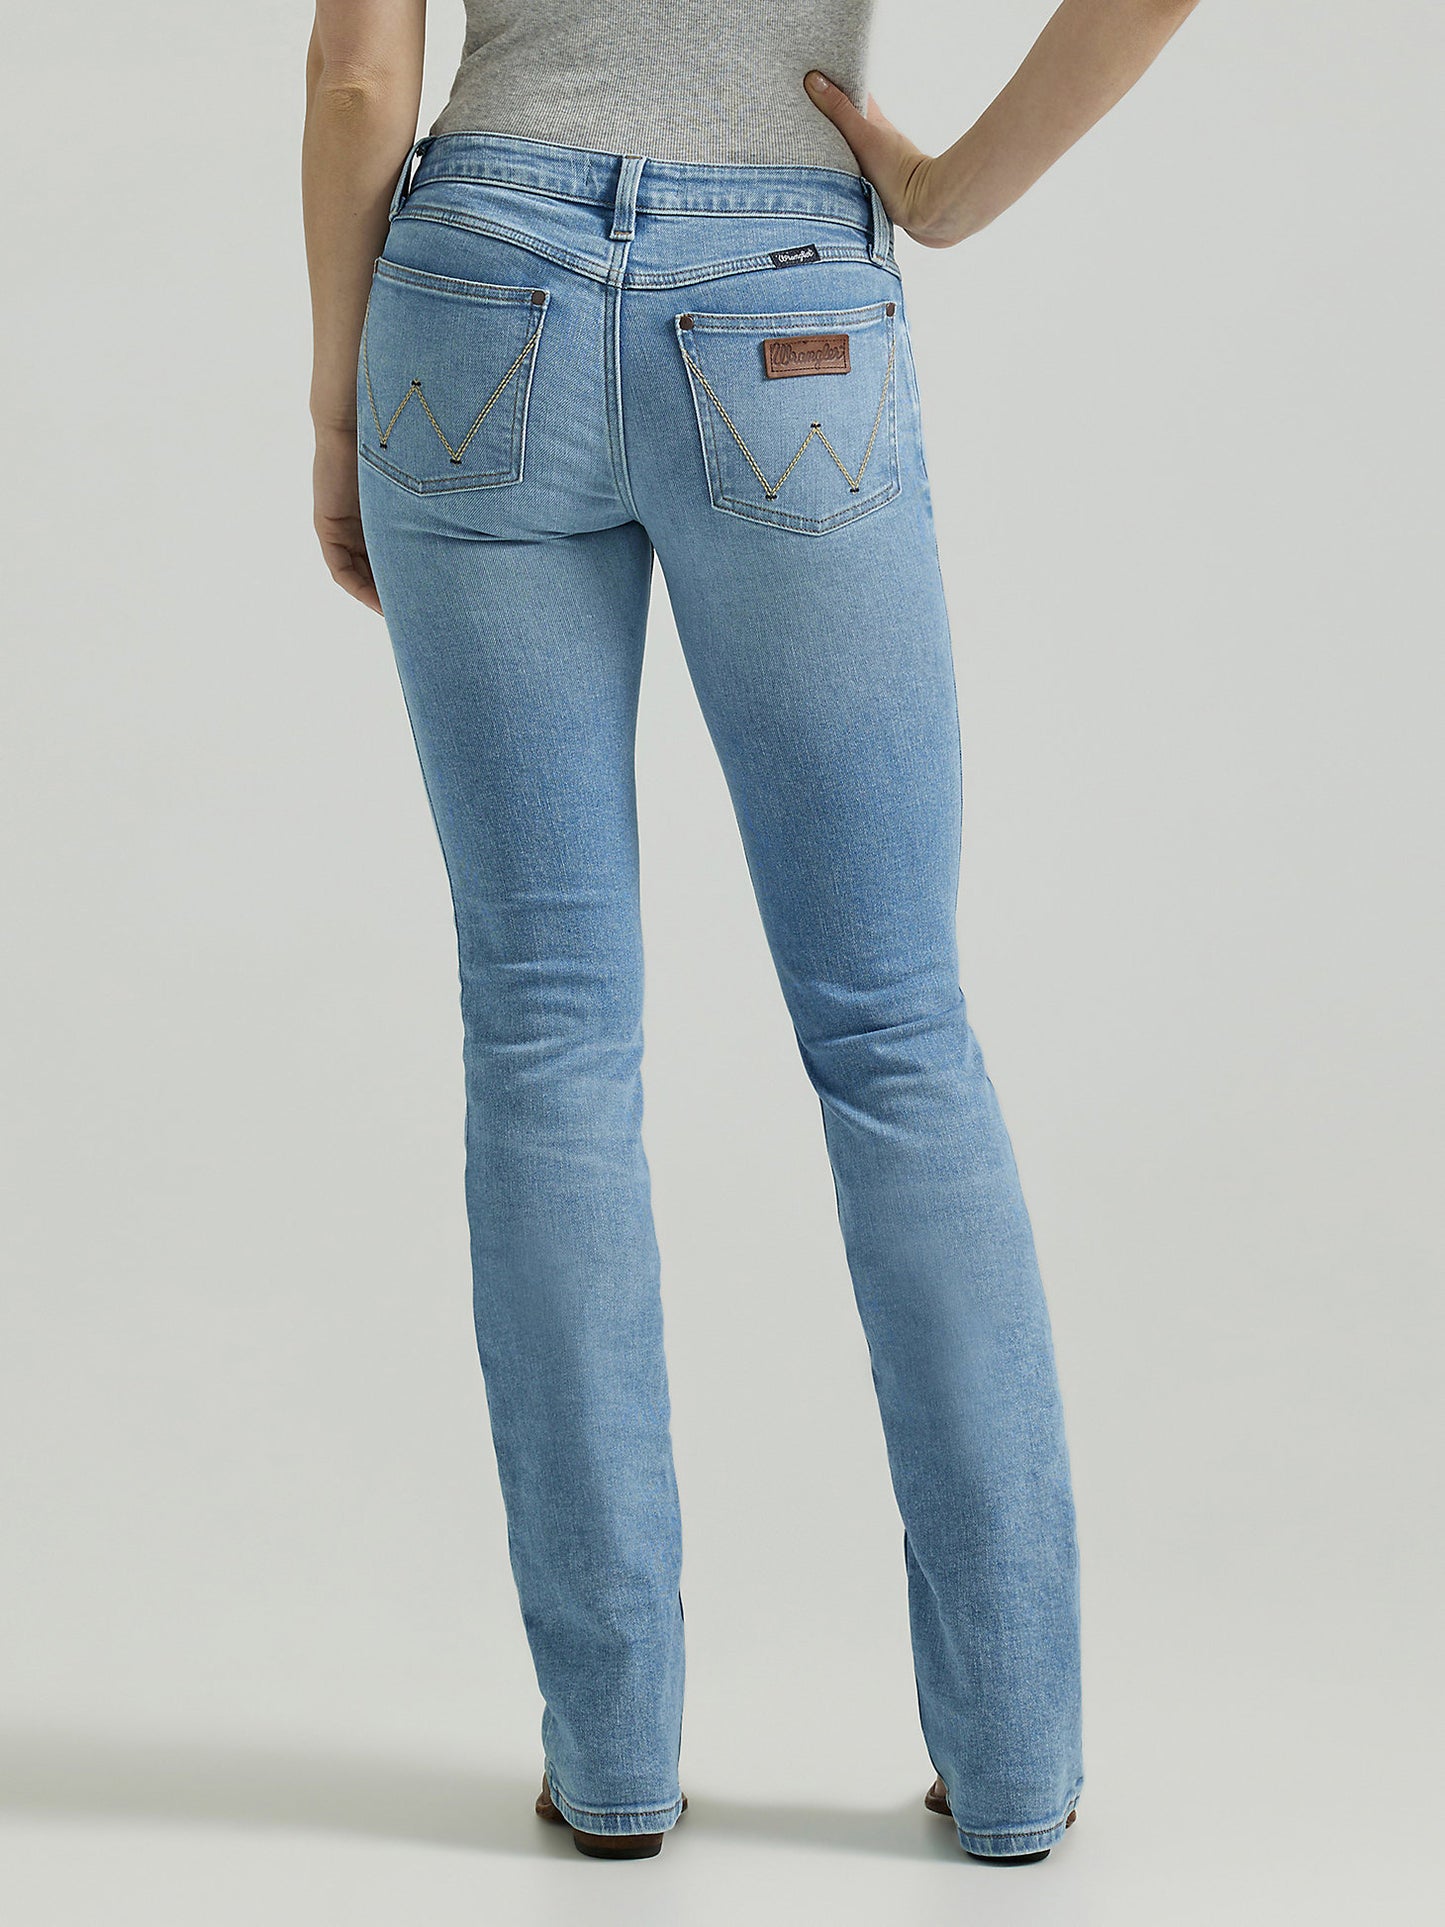 Nellie Bootcut Women's Mid Rise Jeans